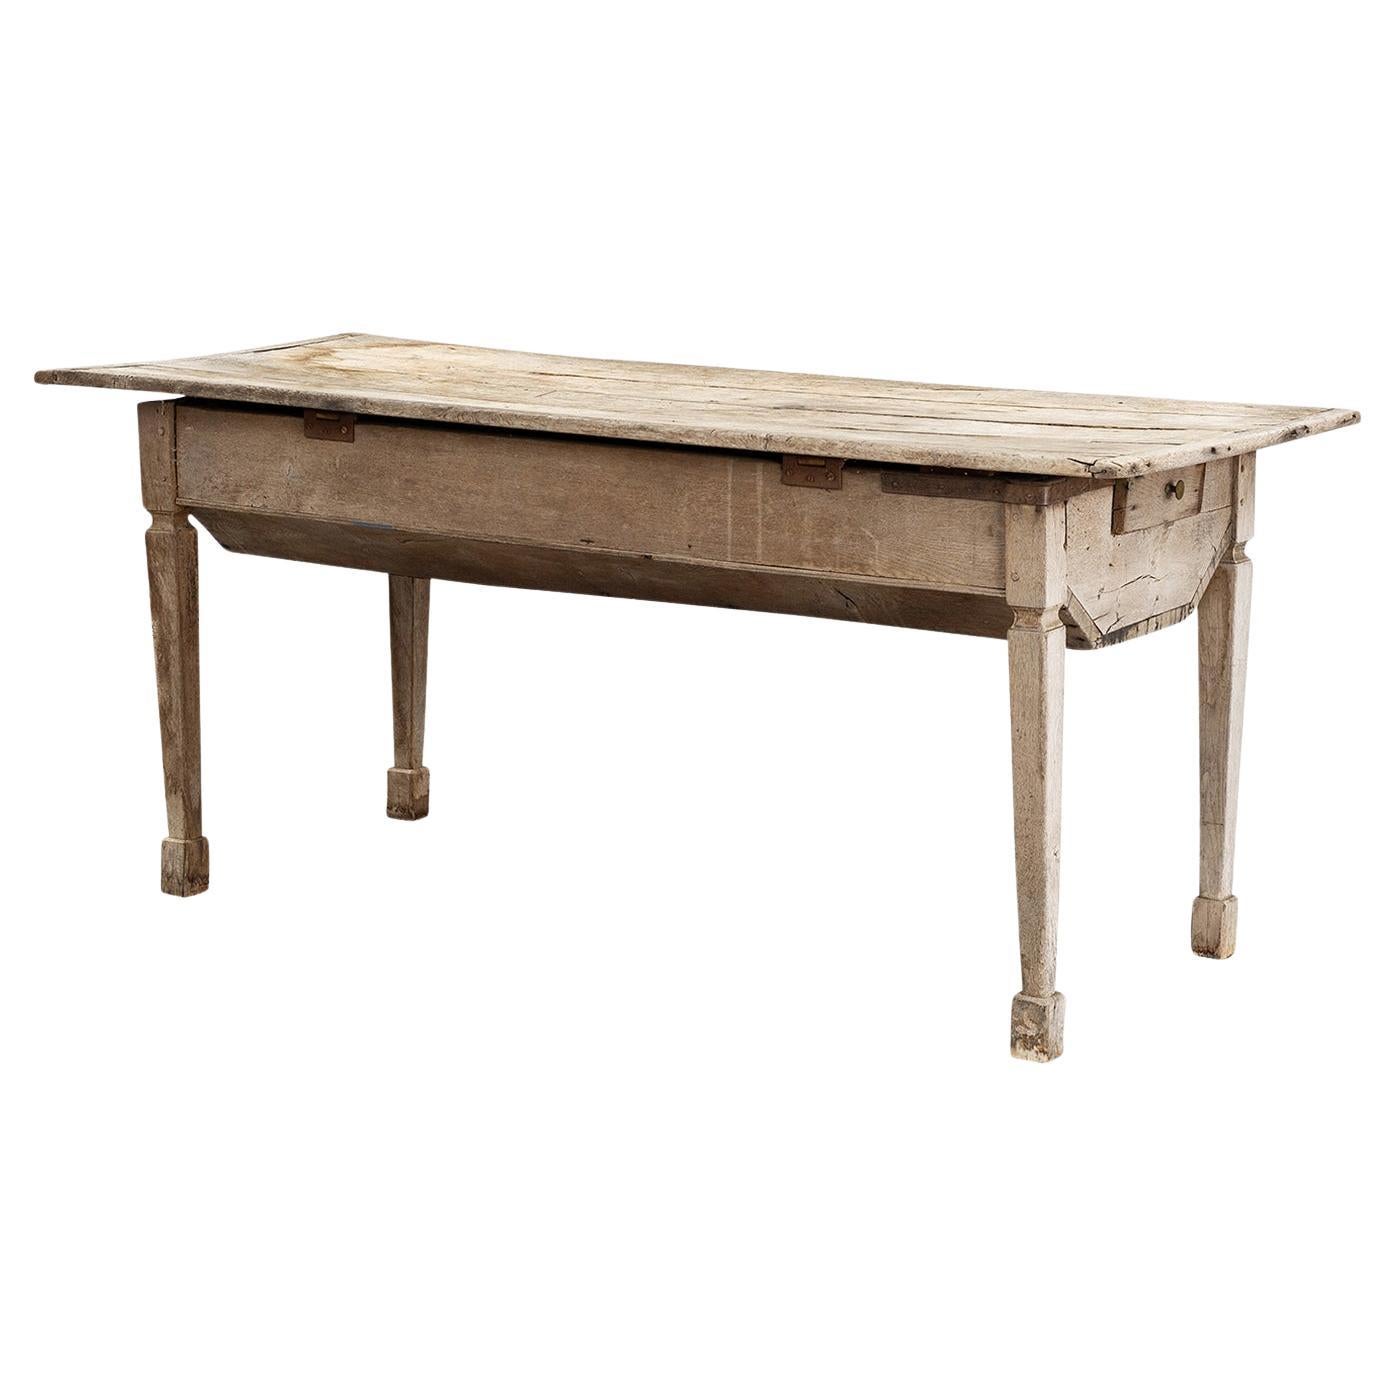 What is a farmhouse style table?